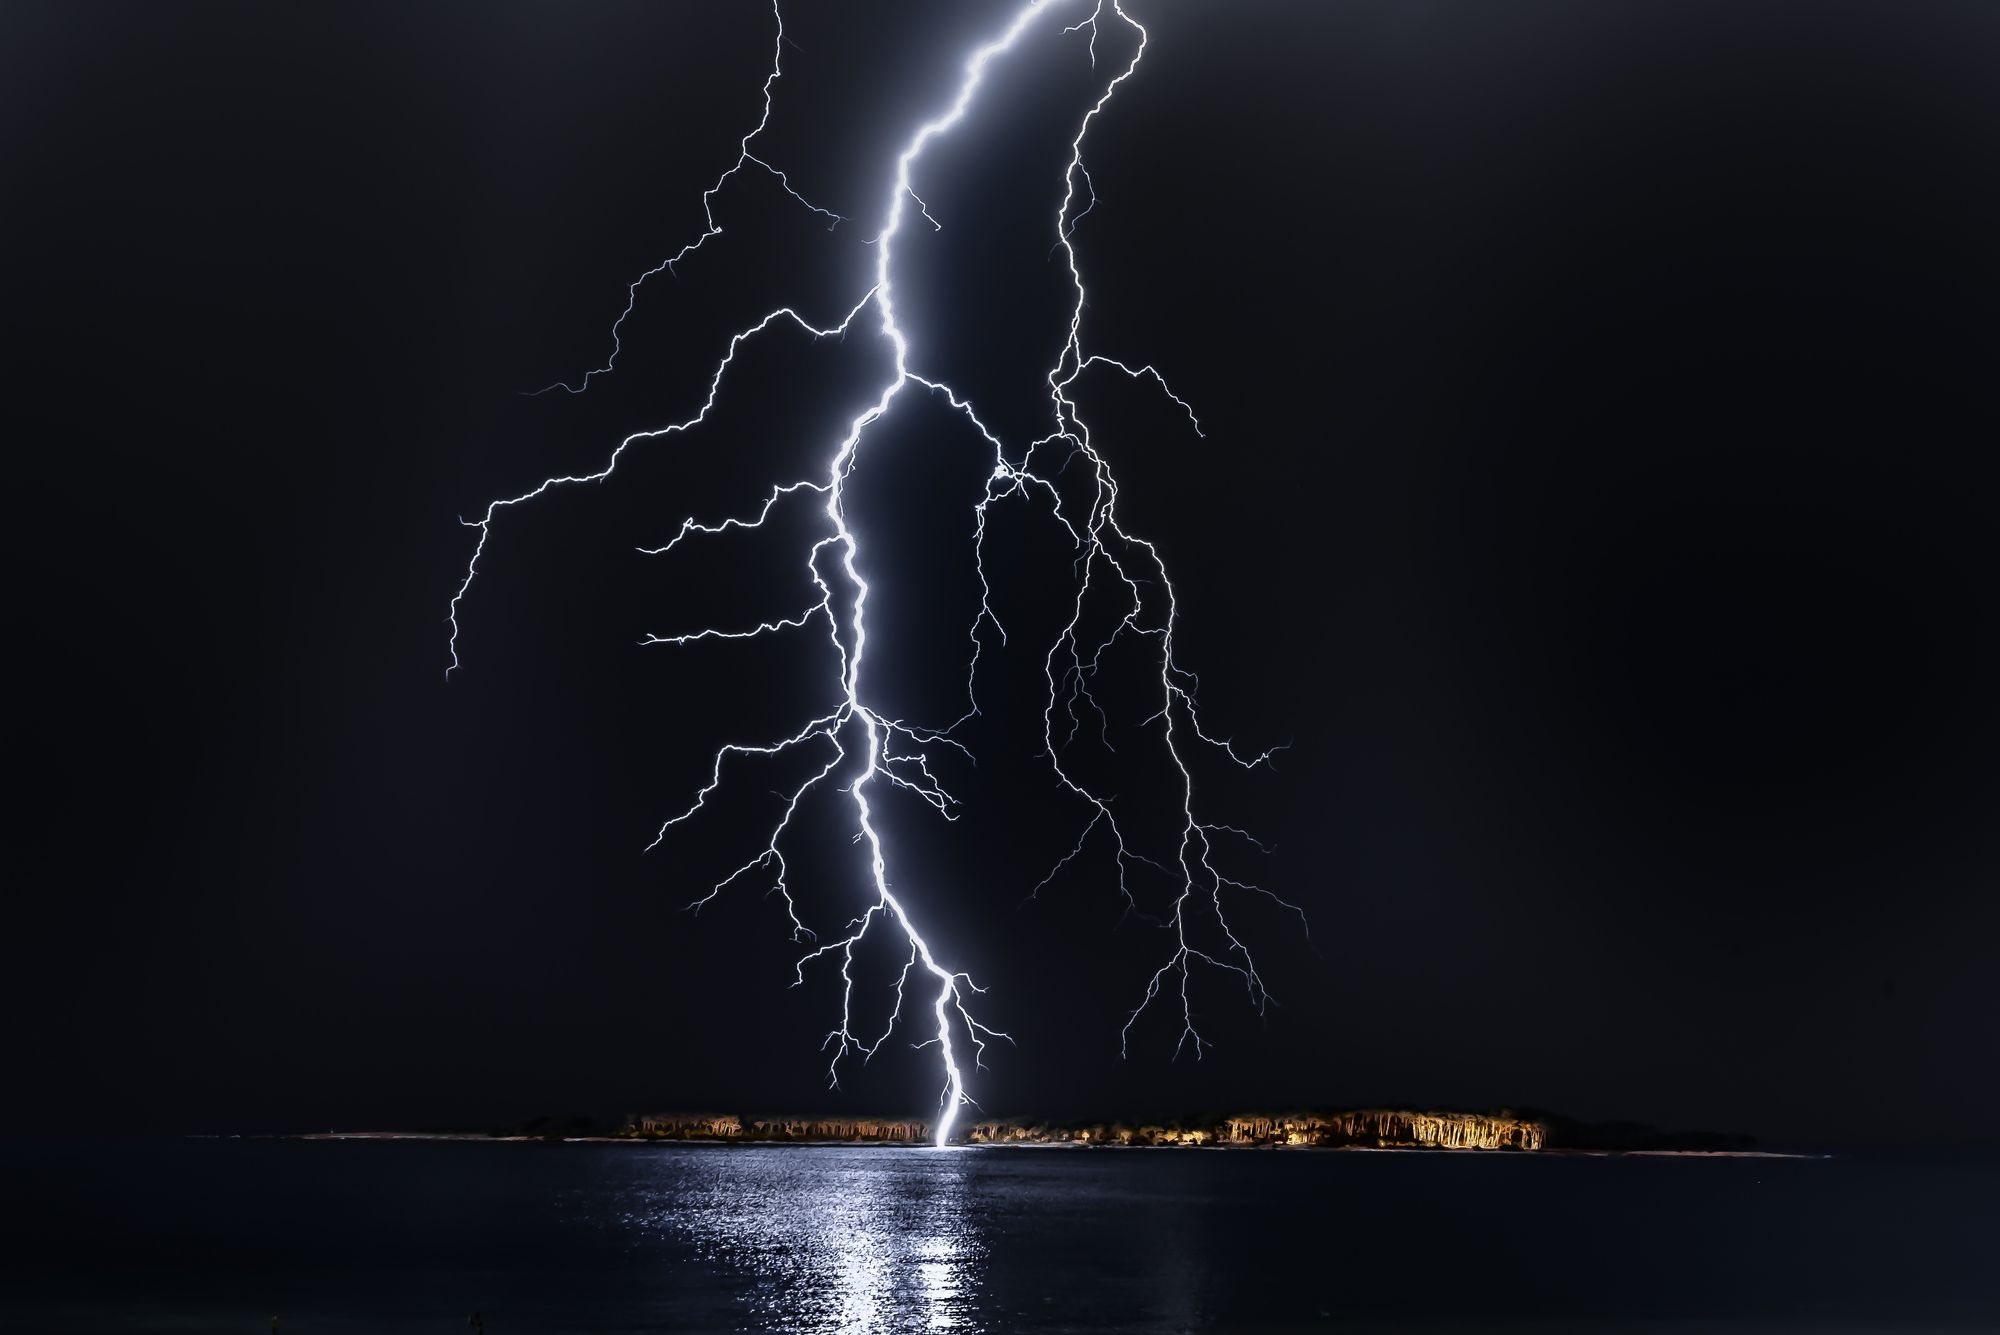 Getting Lightning to Strike the Same Place Twice: Developing Venture Ideas